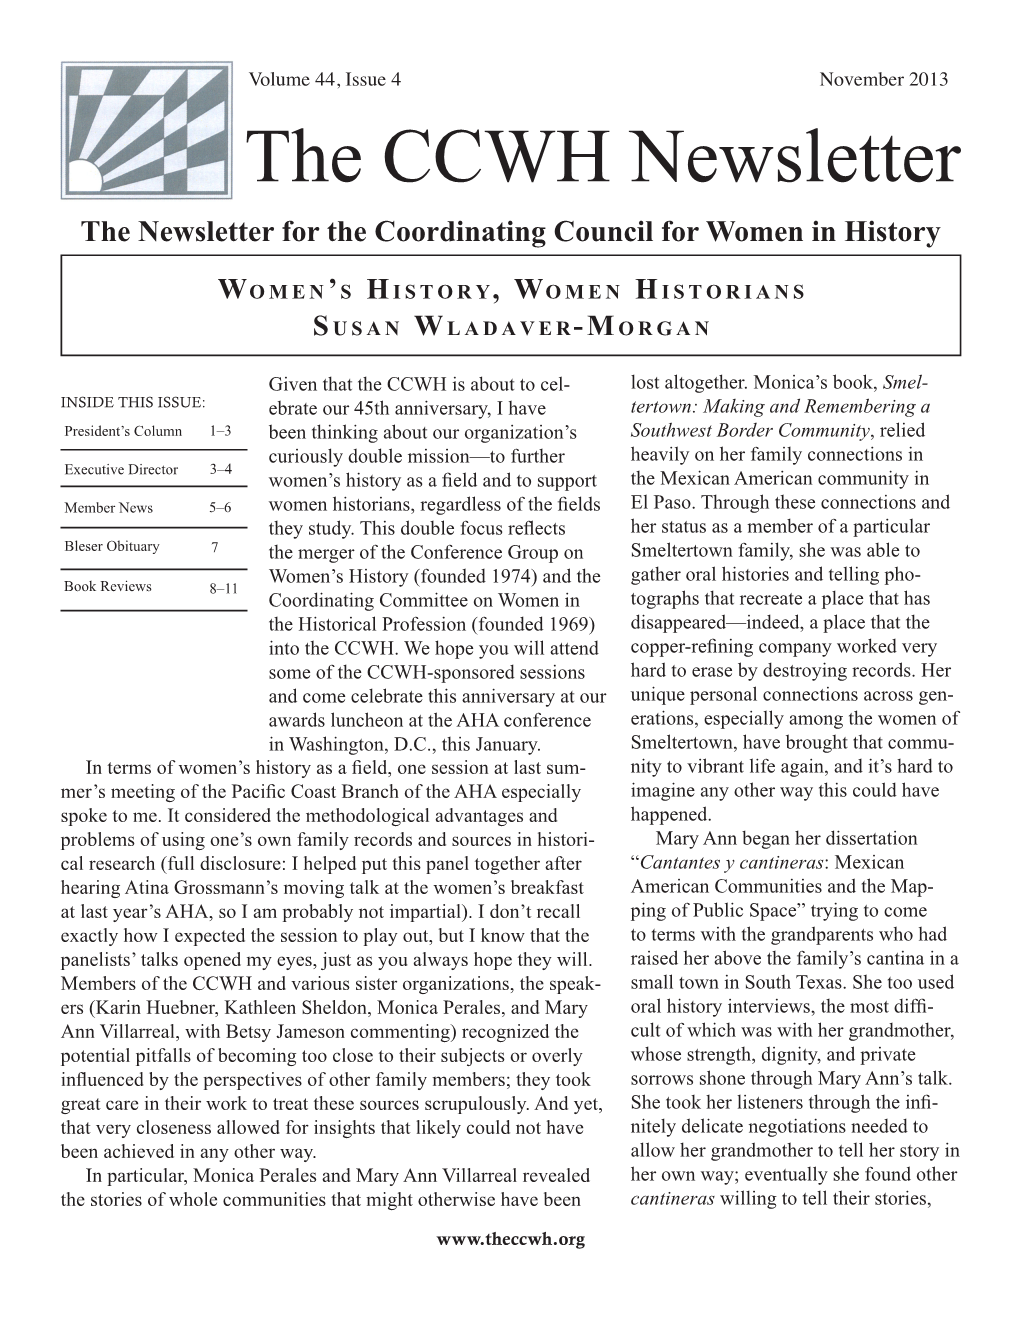 The CCWH Newsletter the Newsletter for the Coordinating Council for Women in History